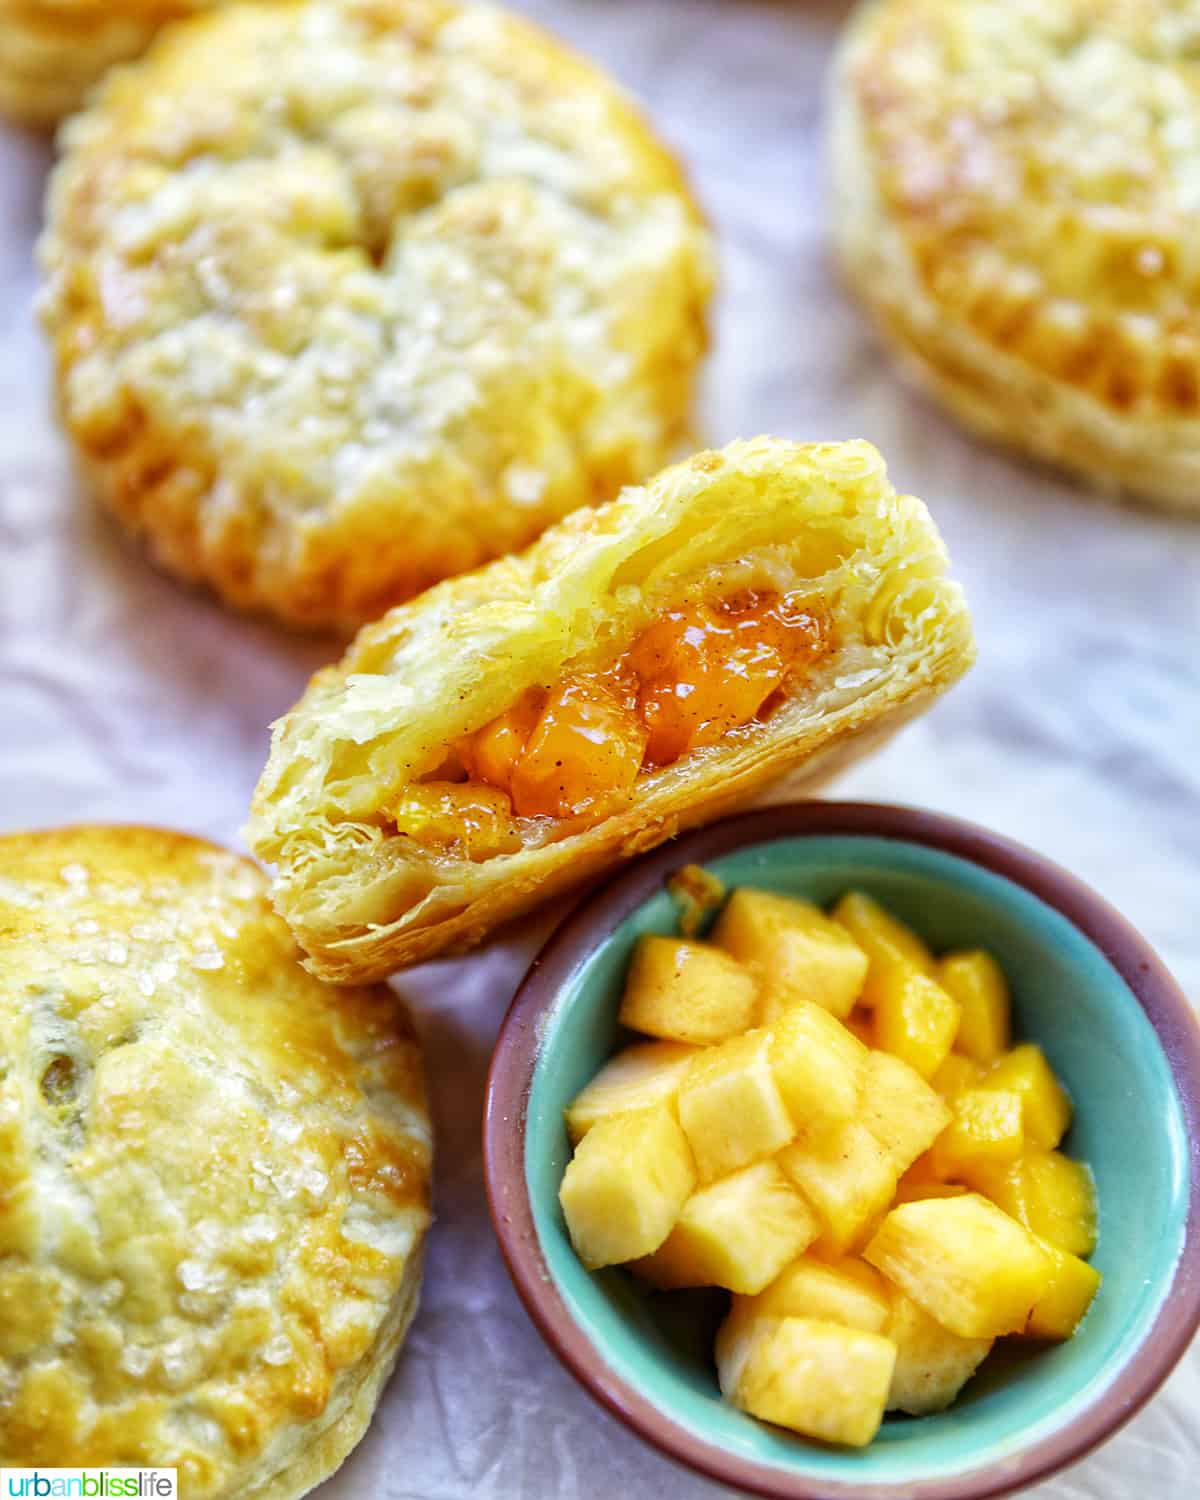 several mini peach mango hand pies on crinkled parchment paper with a bowl of diced peaches and mangoes.